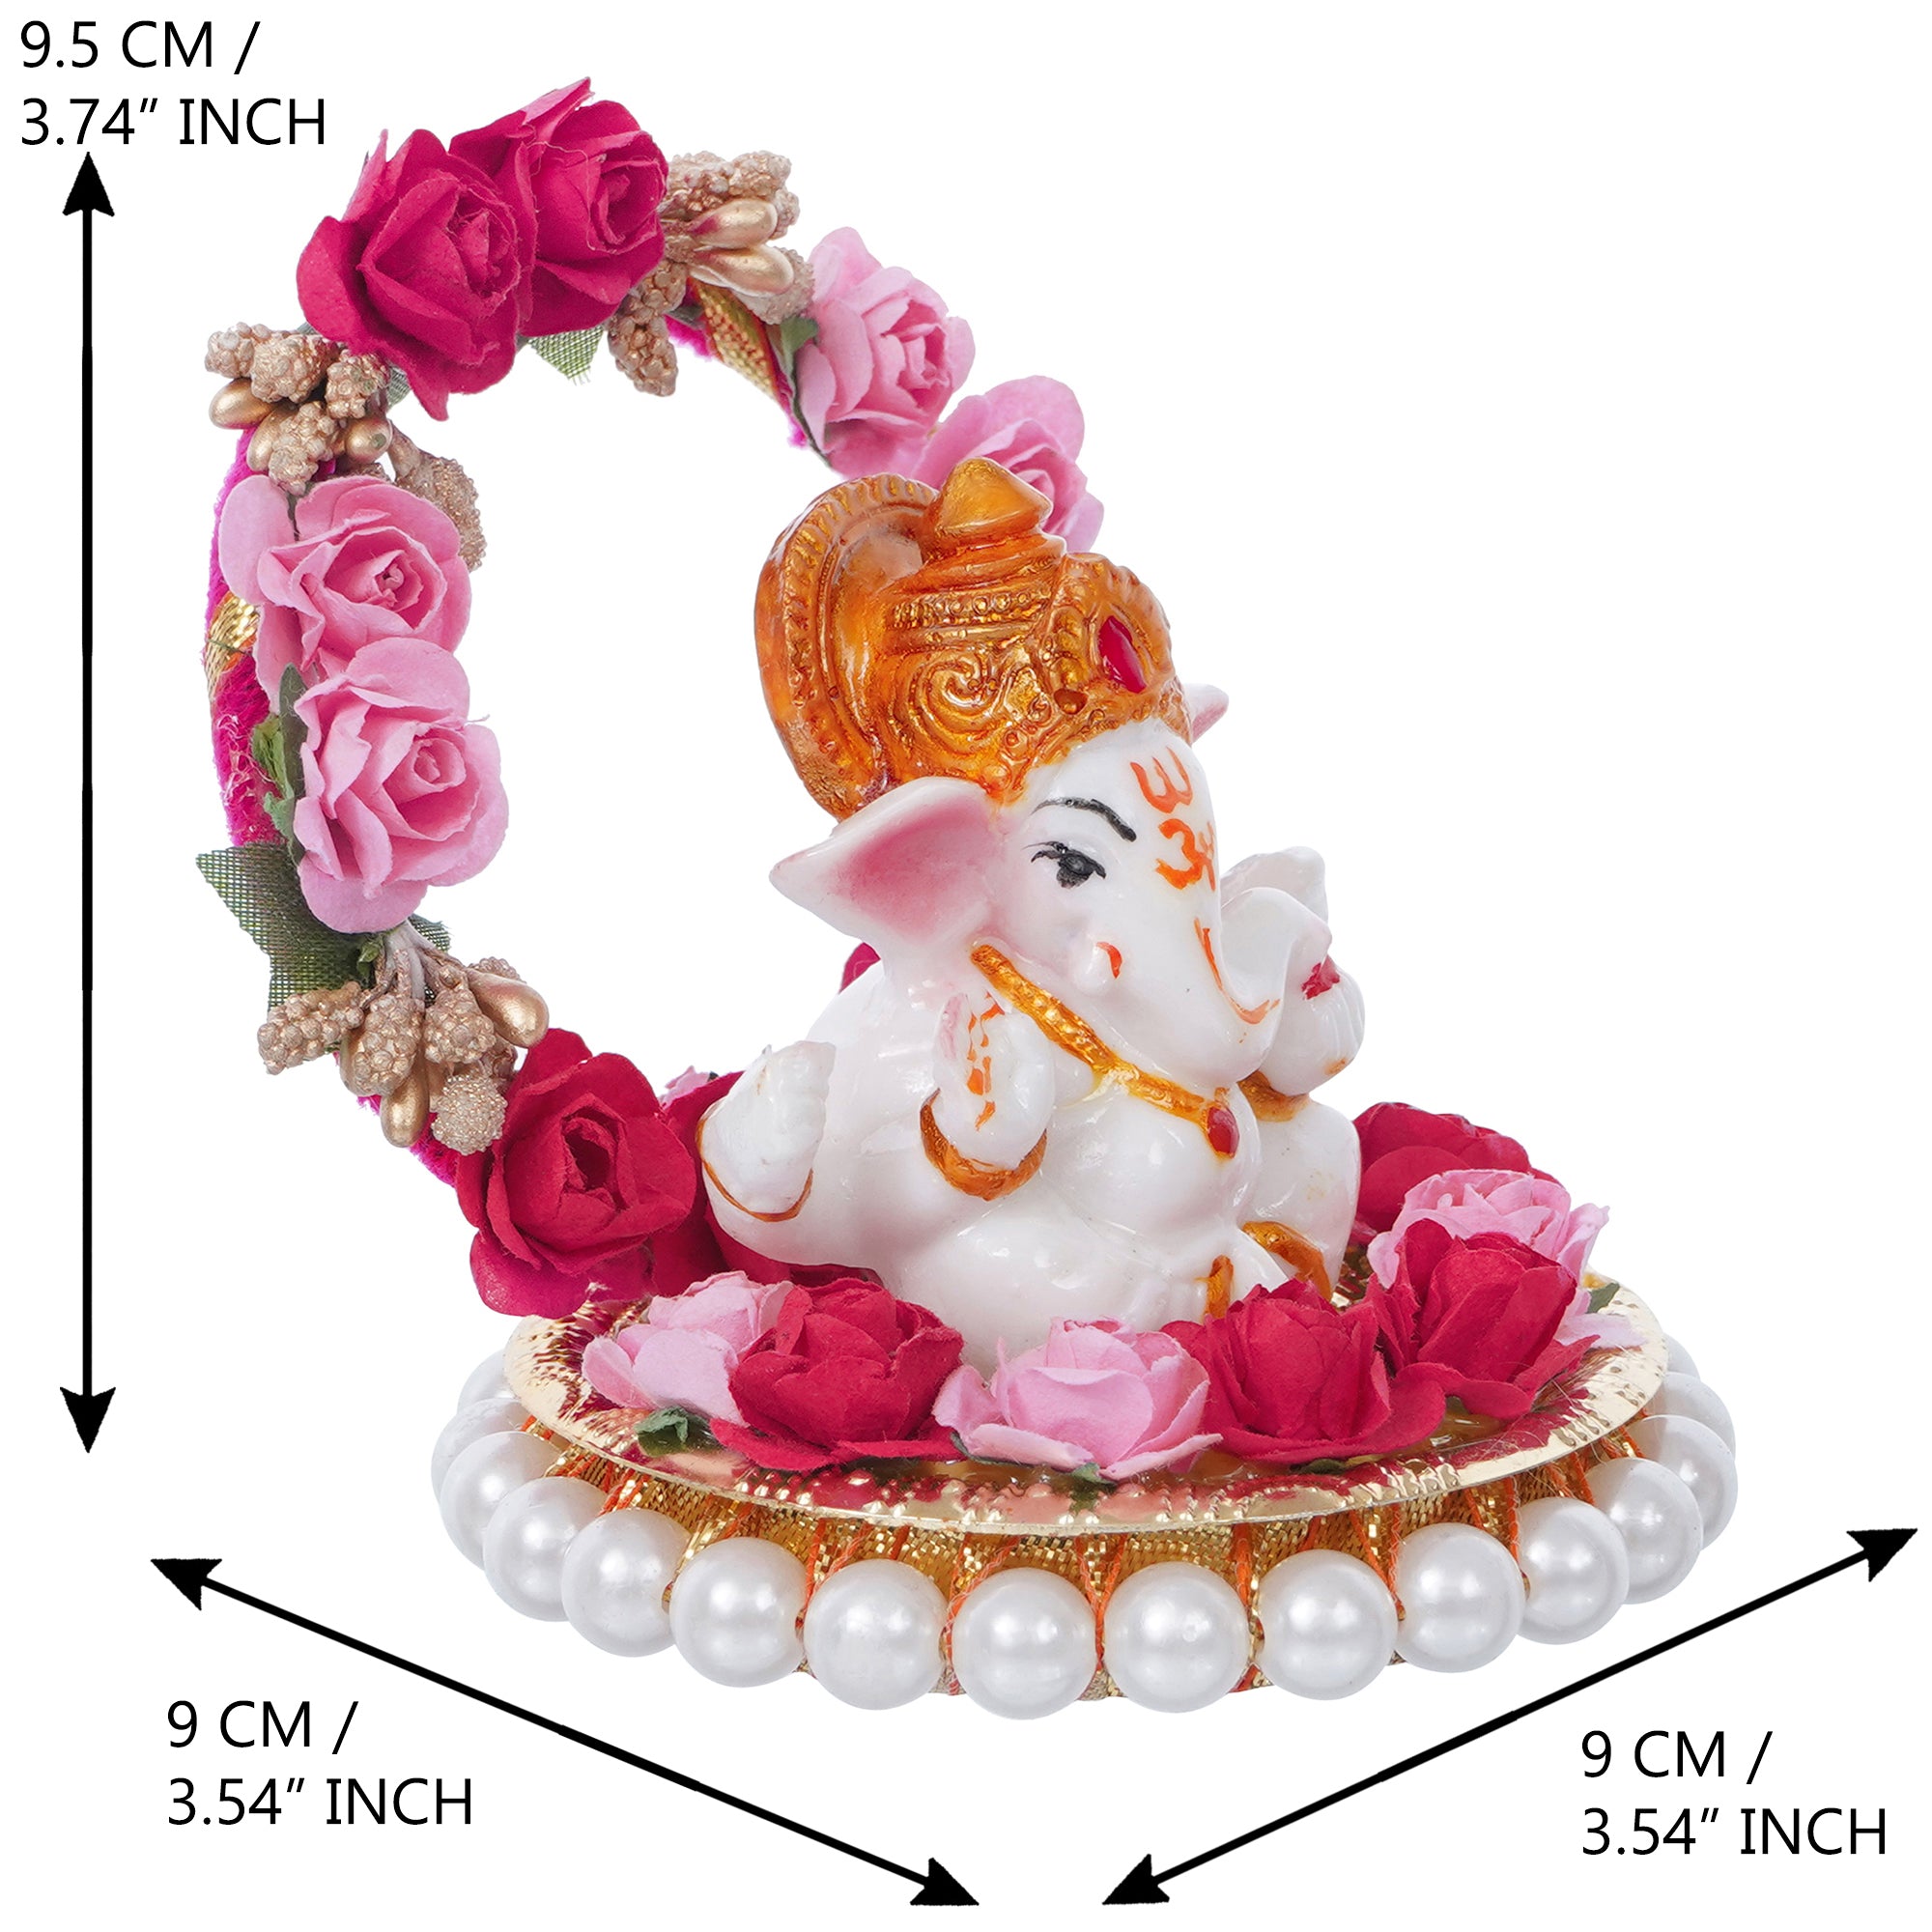 Polyresin Lord Ganesha Idol on Decorative Handcrafted Plate with Throne of Pink and Red Flowers 3